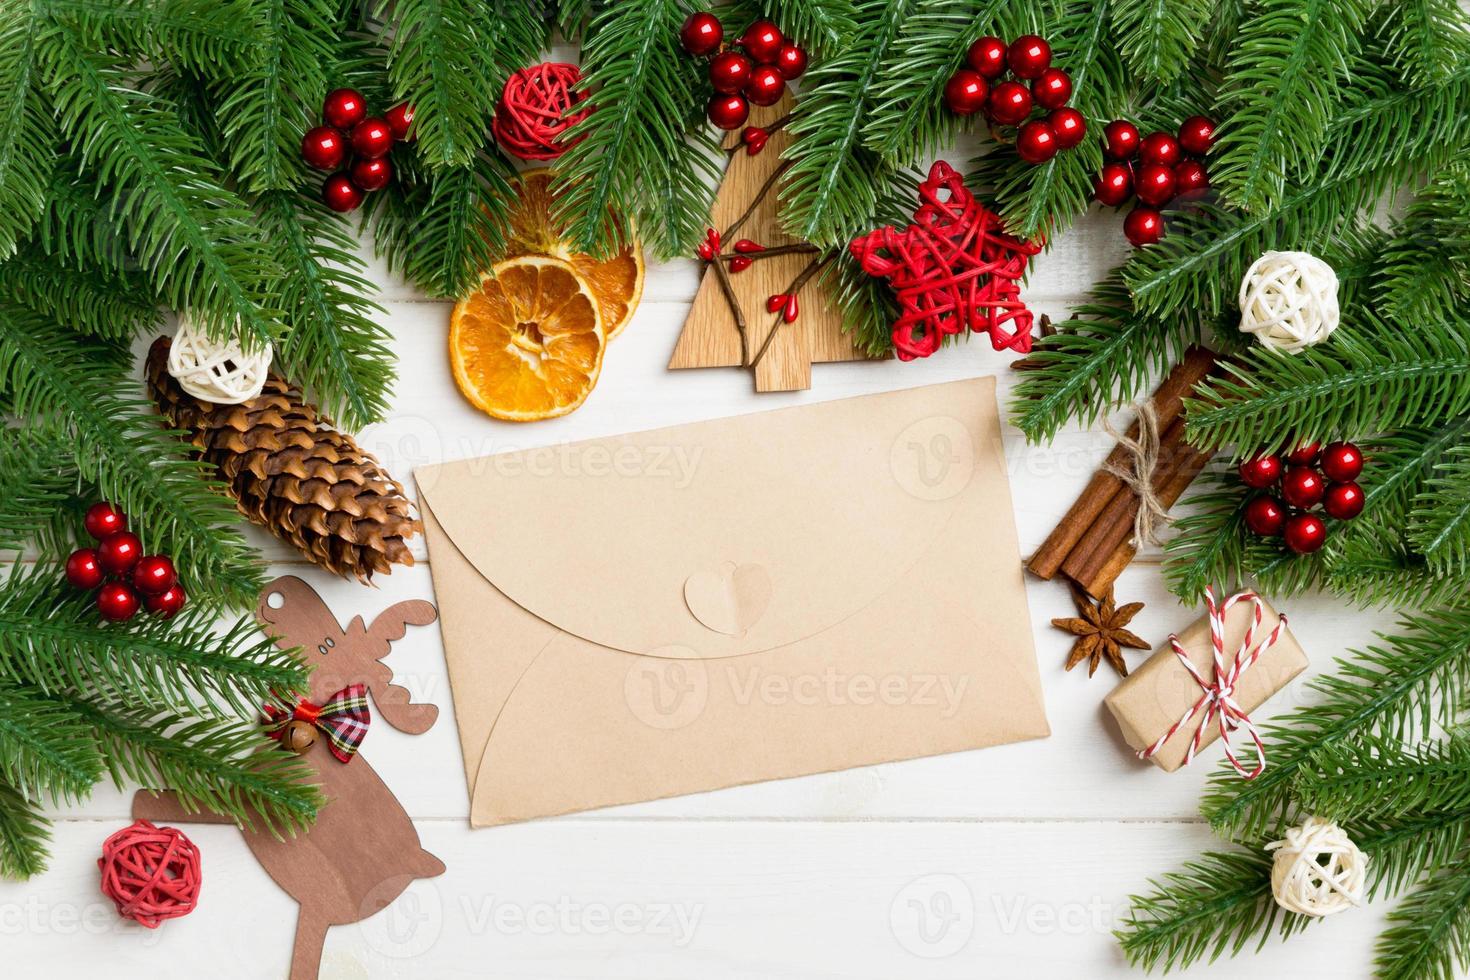 Top view of fir tree branches, envelope and festive decorative toys on wooden background. New Year time concept photo